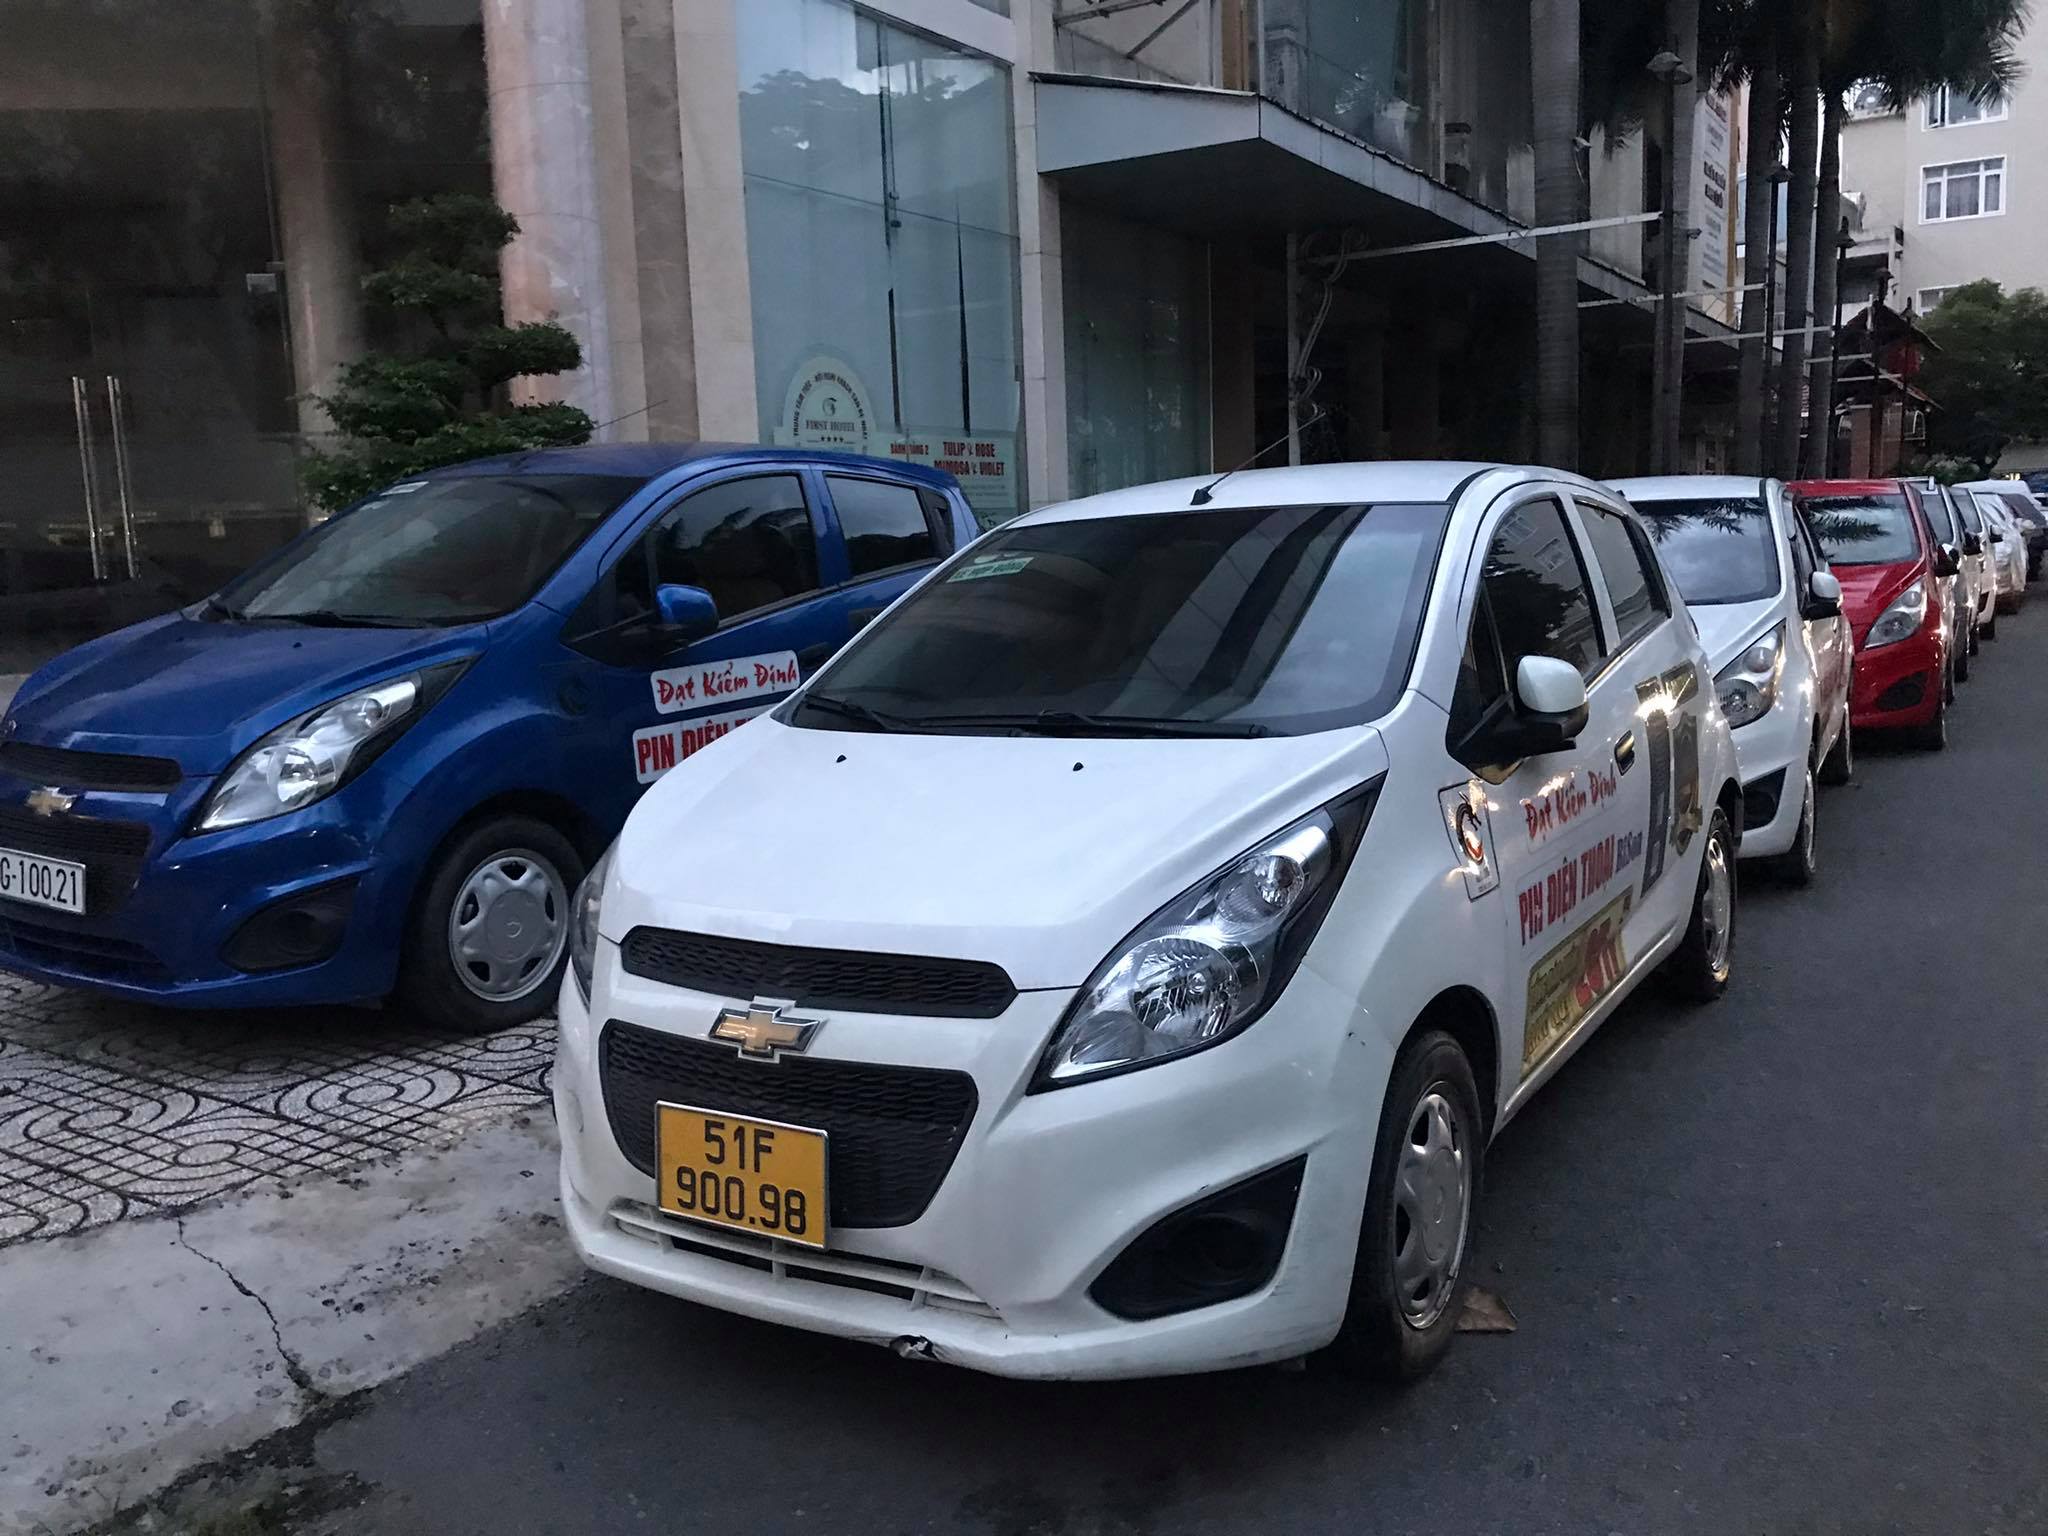 Grab re-operates with new service, GrabCar Protect, in Ho Chi Minh City